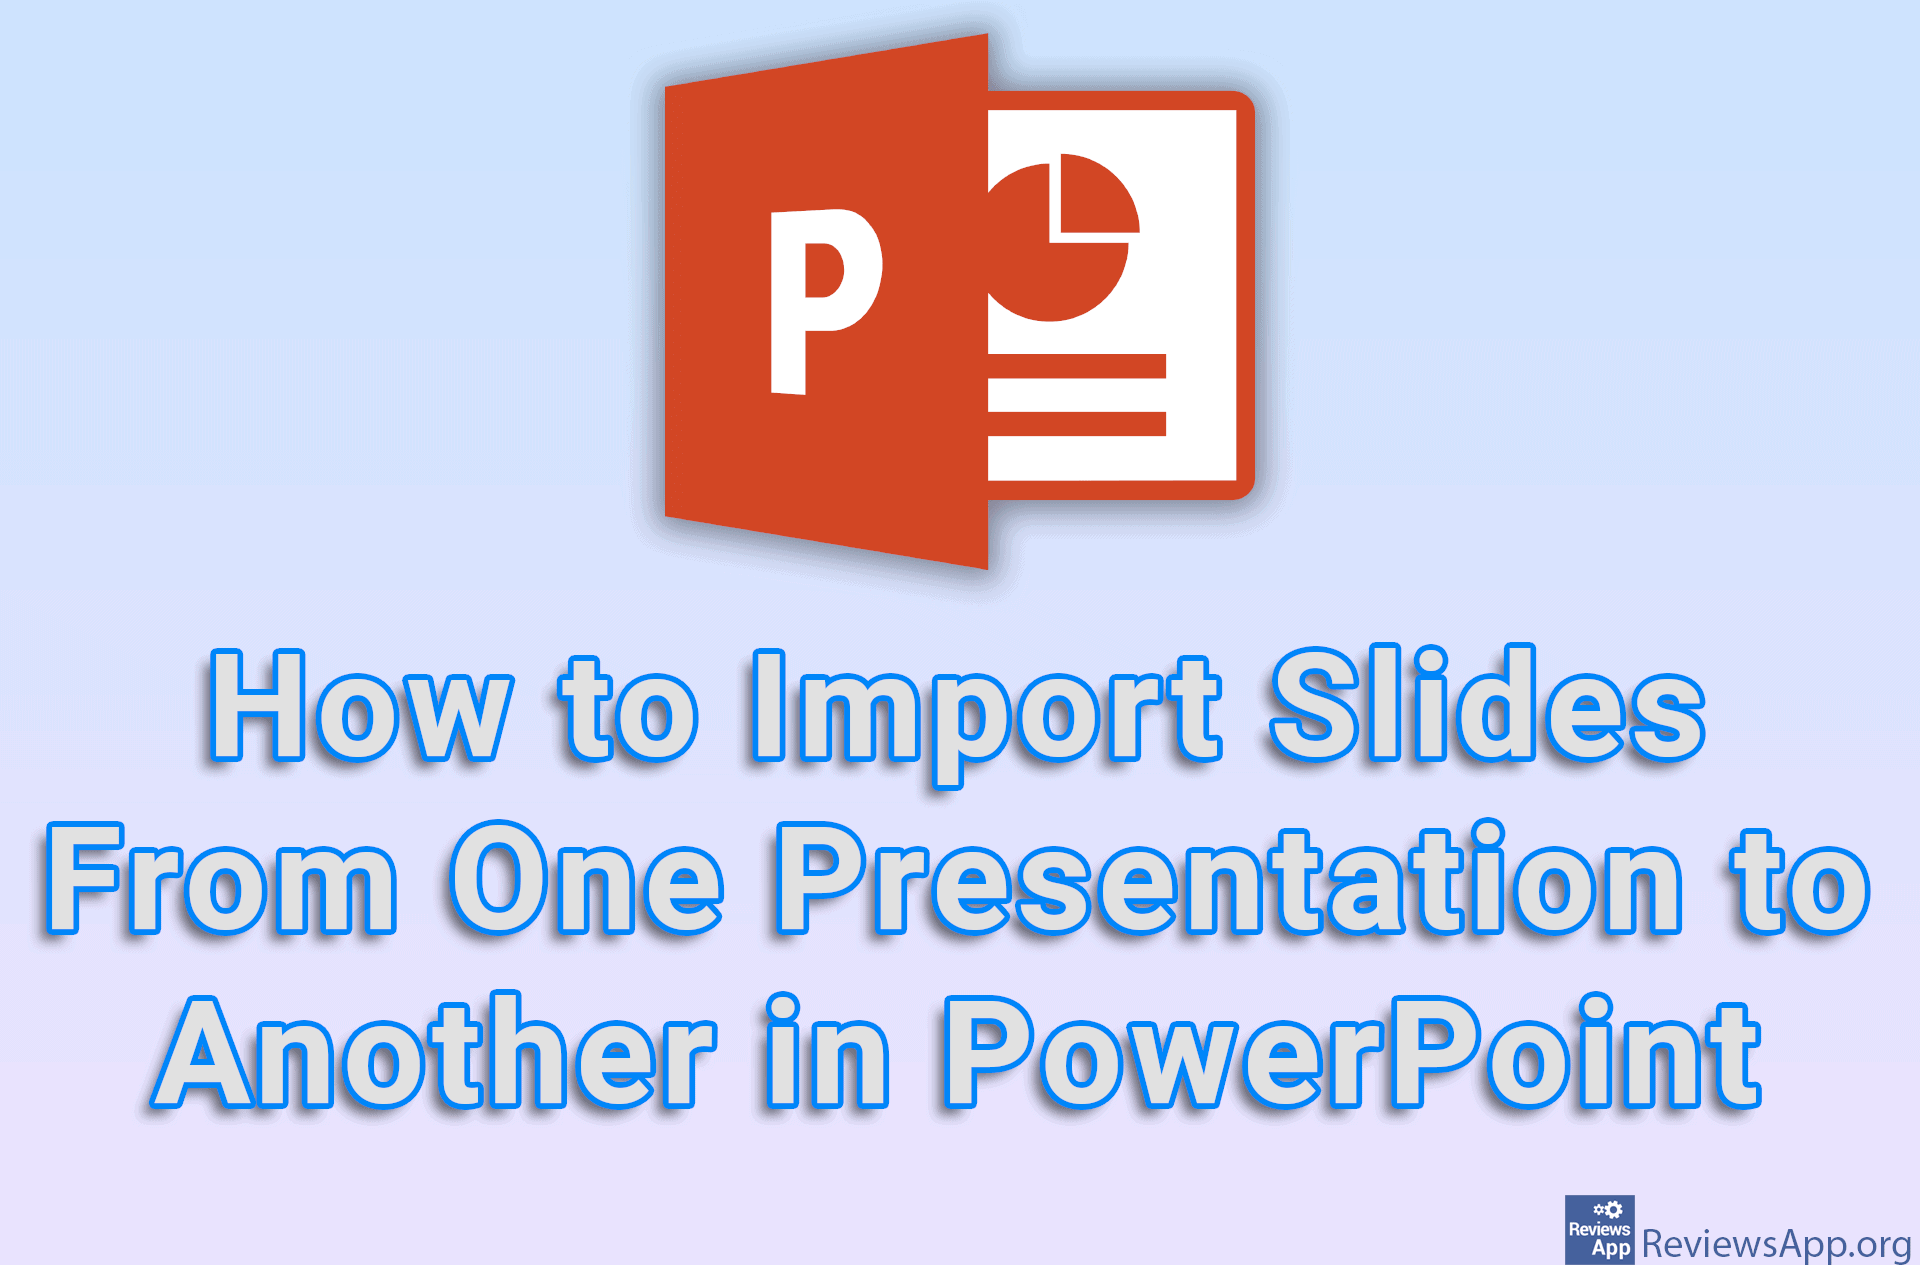 How to Import Slides From One Presentation to Another in PowerPoint